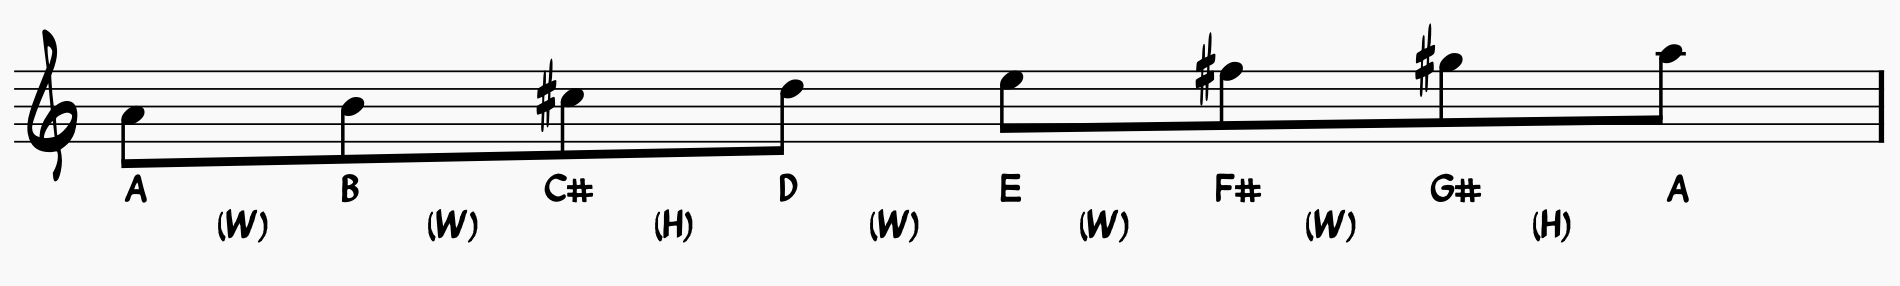 A major scale notated with whole steps and half steps